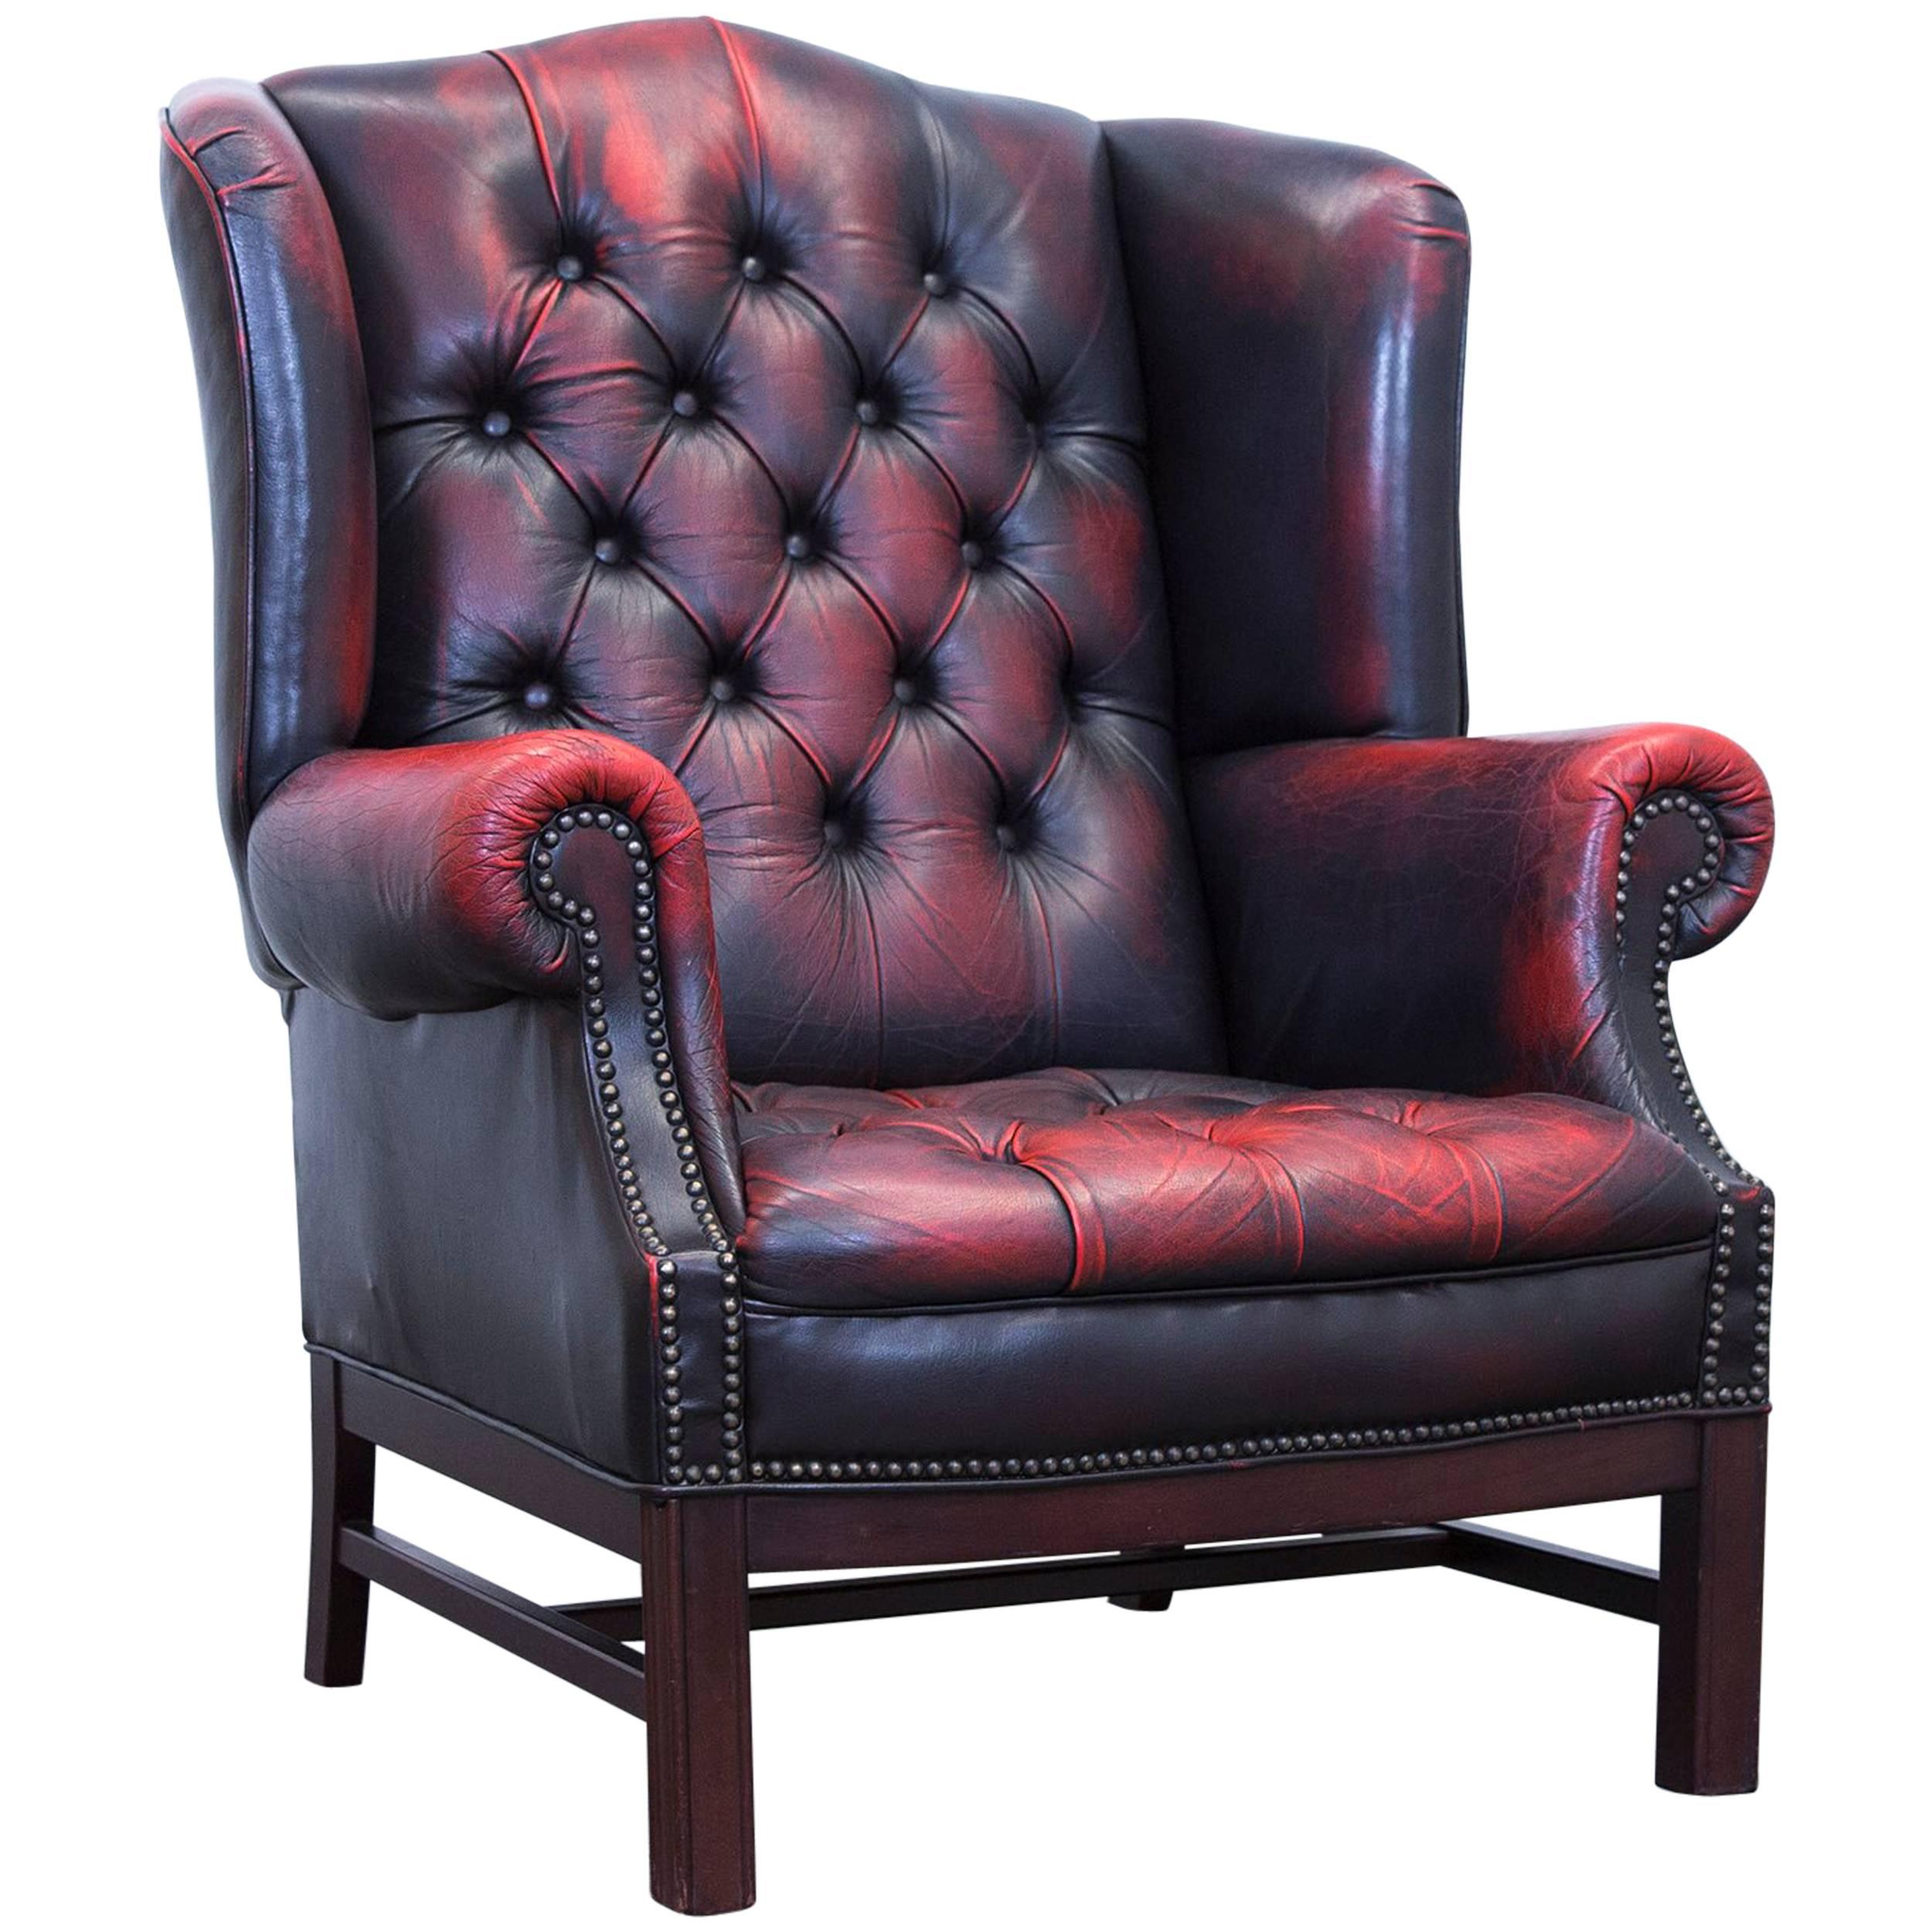 Chesterfield Armchair Leather Red Brown Three-Seat Couch Retro Vintage